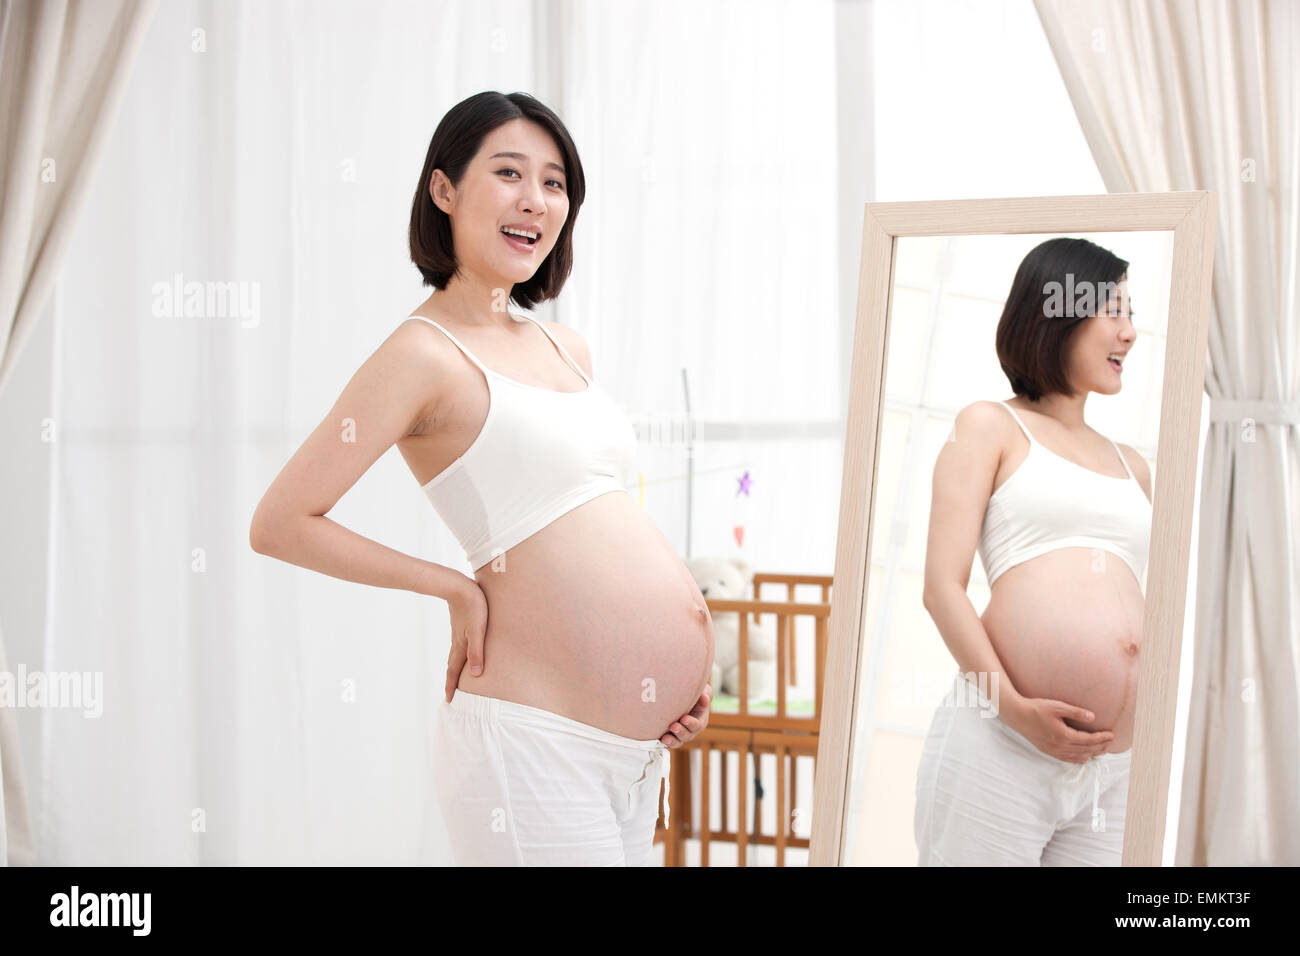 The pregnant woman standing in front of the mirror Stock Photo